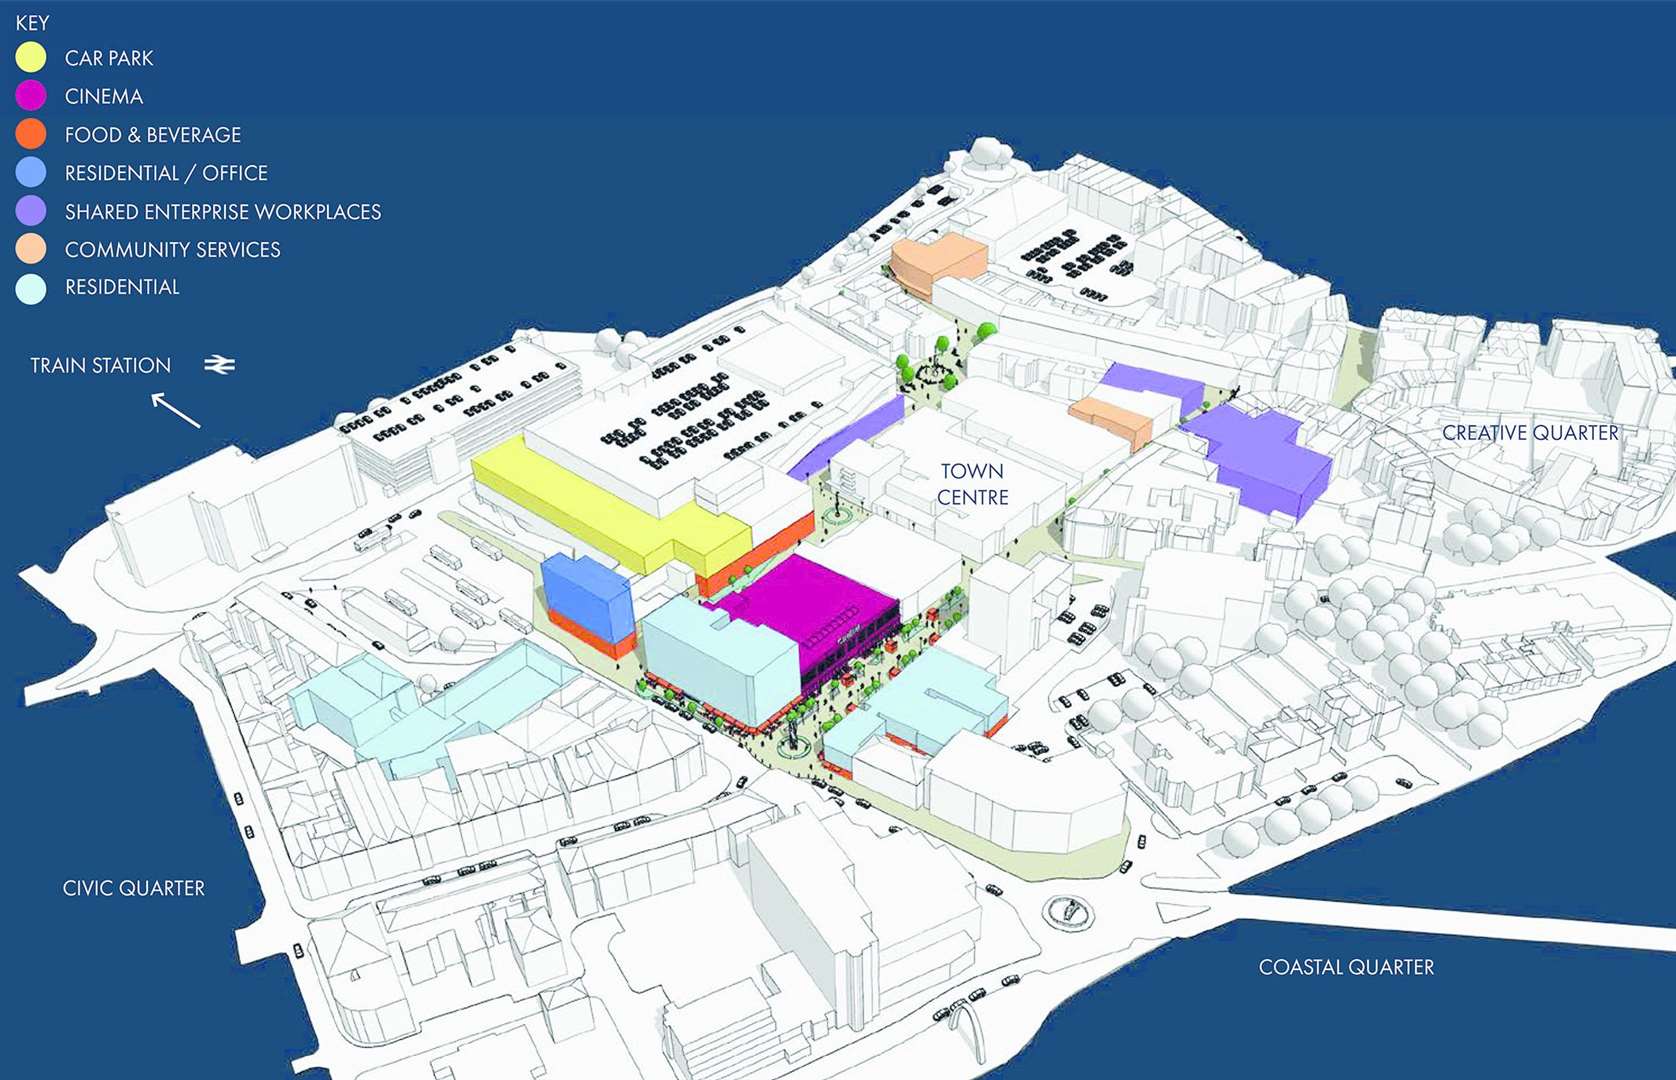 The new town centre plans for Folkestone, including a cinema on the Debenhams site. Credit: Turnerbates Ltd (9217003)